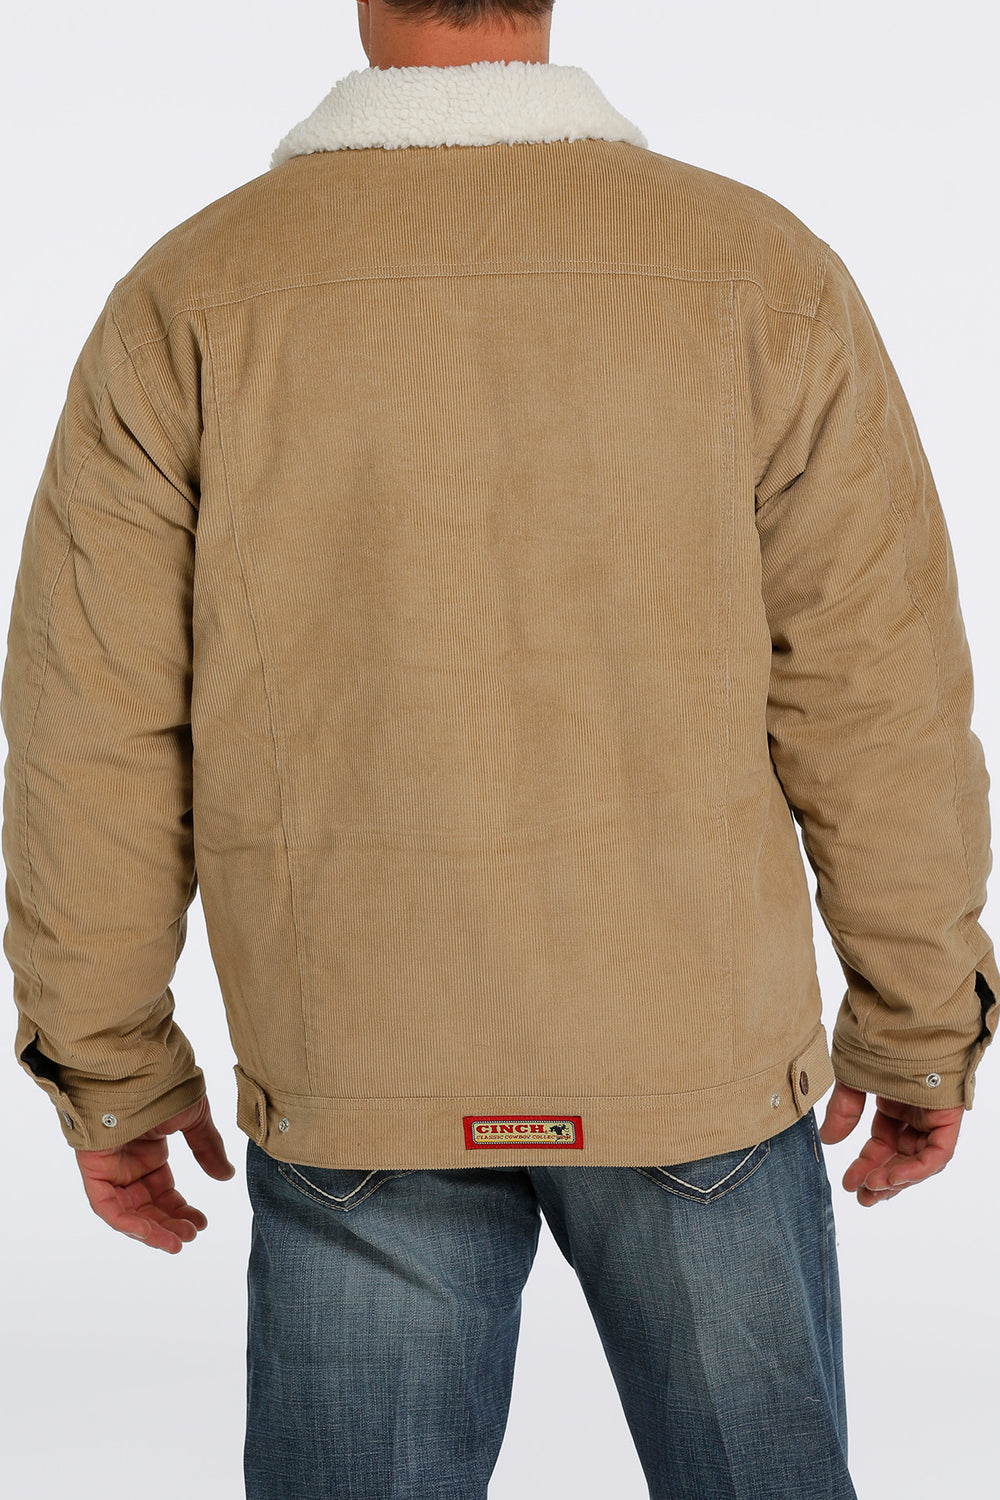 Back View Cinch | Khaki Corduroy Concealed Carry Trucker Jacket